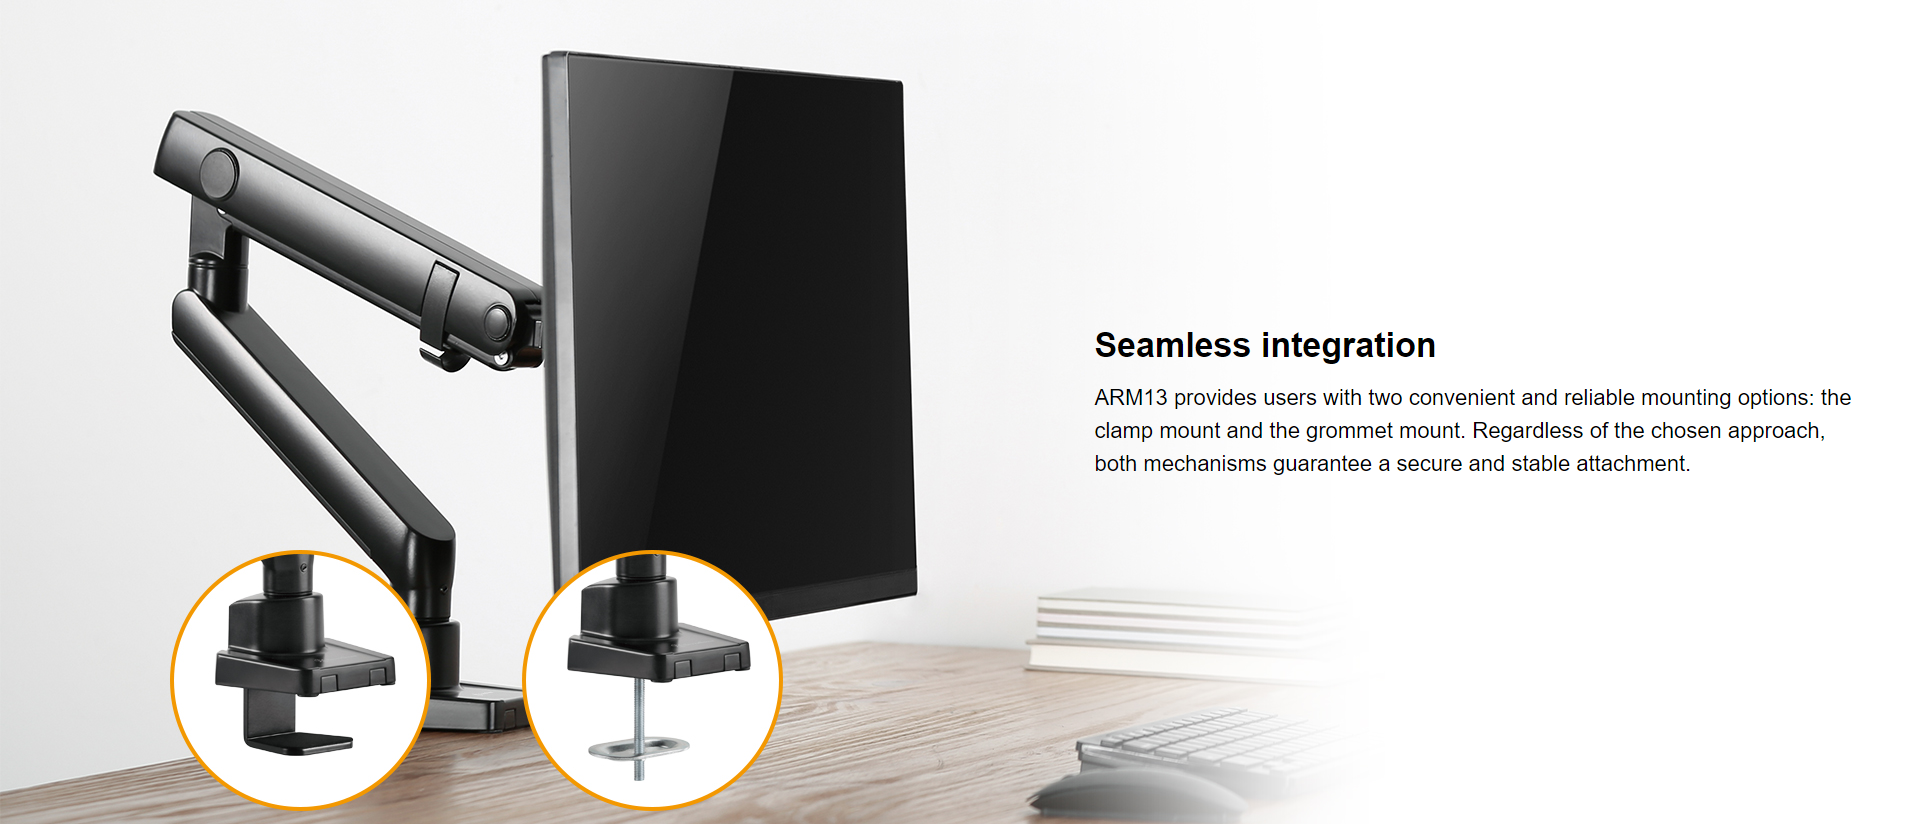 A large marketing image providing additional information about the product SilverStone ARM13 Gas Spring Swing Desk Monitor Mount  - Additional alt info not provided